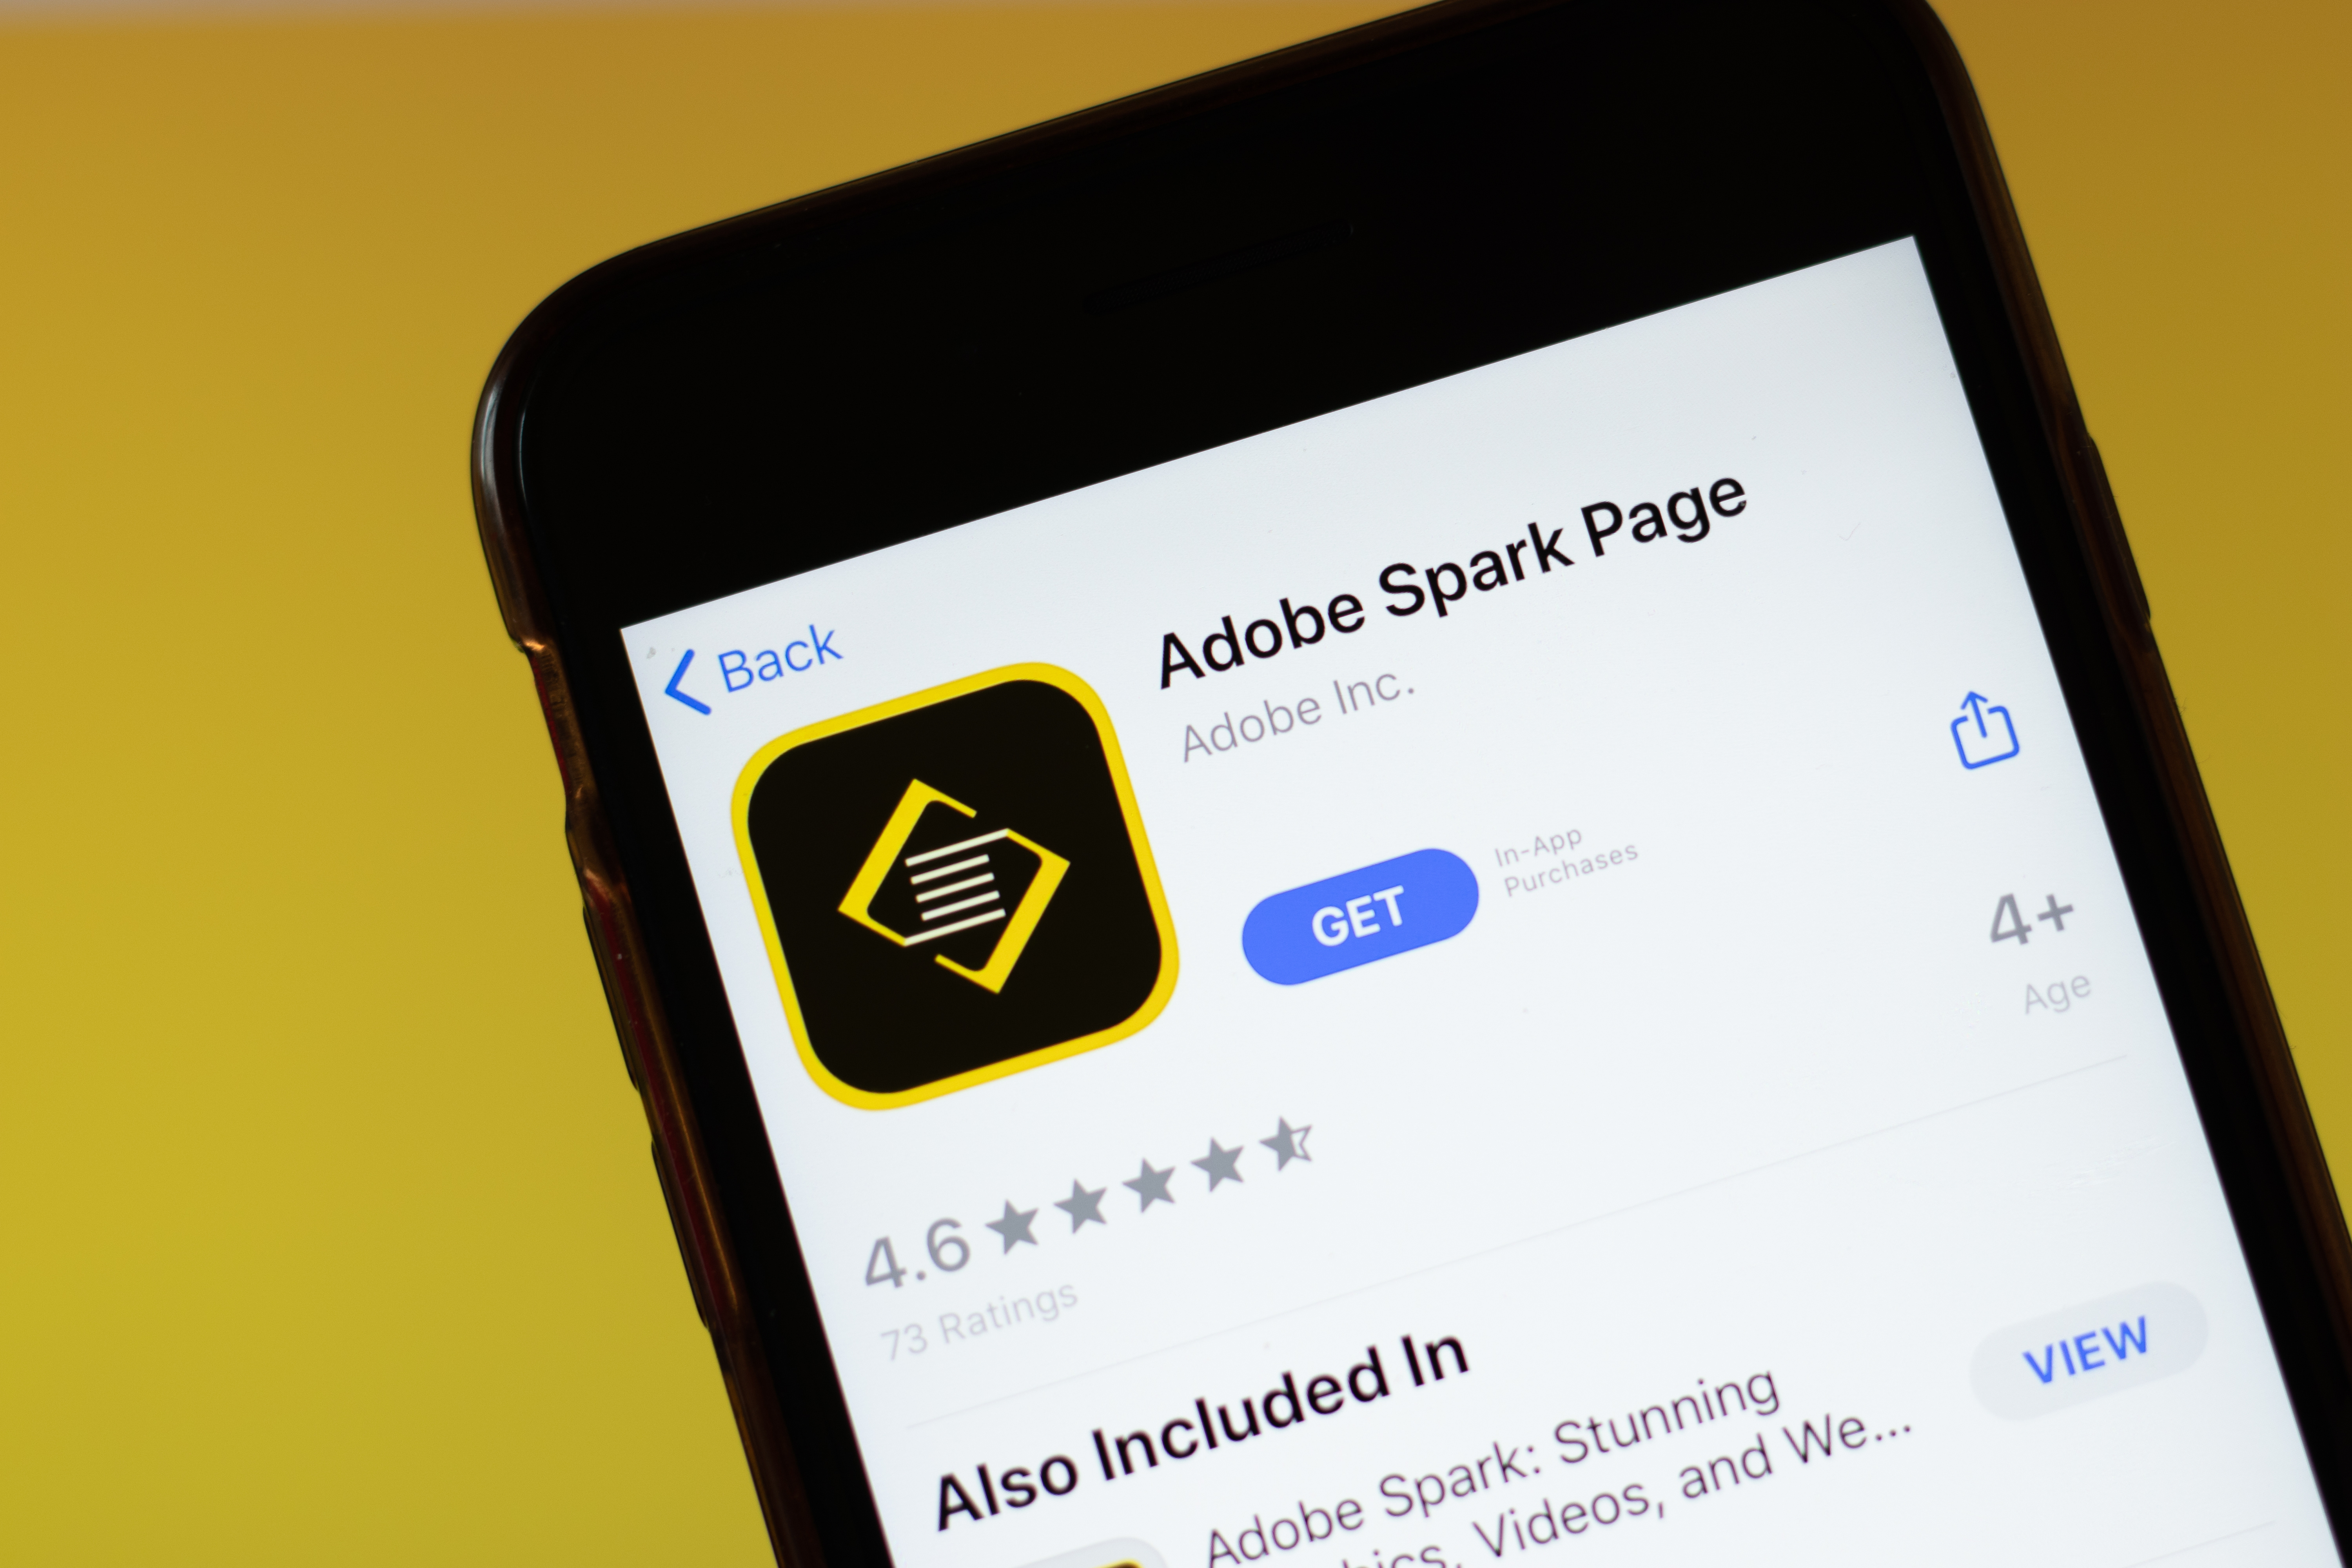 spark-page-15-apps-eng-dtp-multimidia